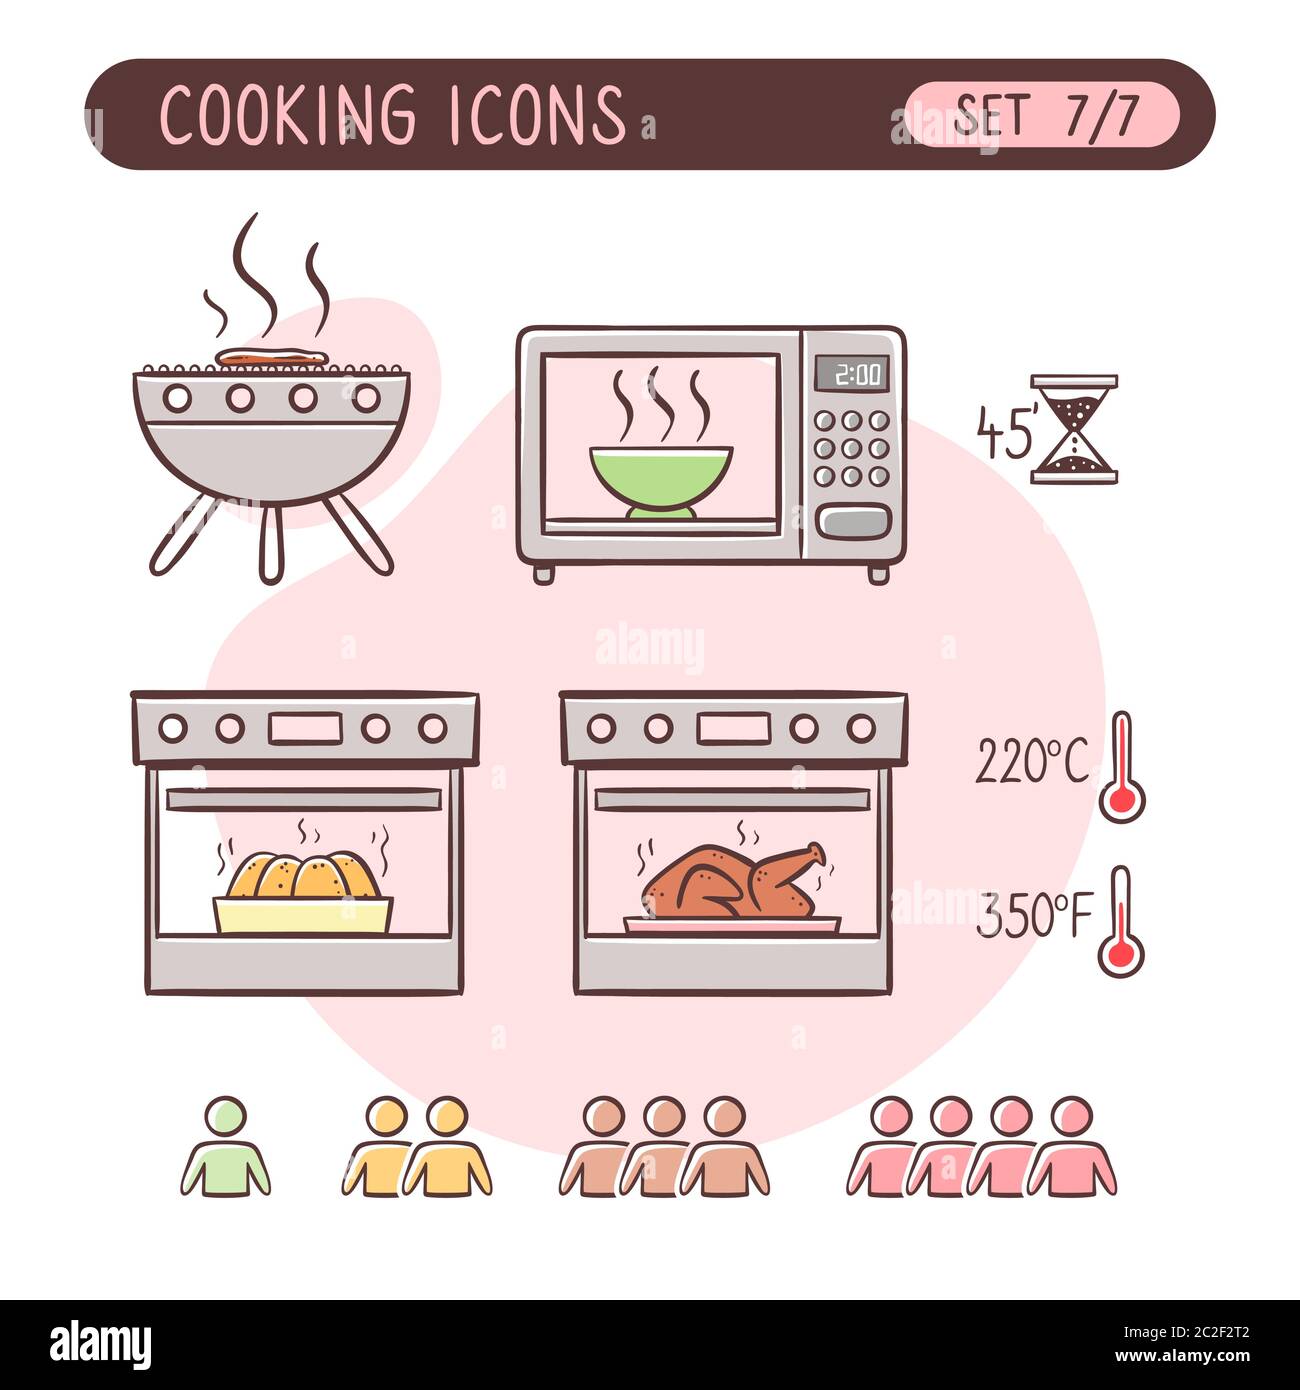 Cooking instructions icon set. Very useful to explain cooking recipes. Colorful hand drawn style. Seventh part of seven images full collection. Stock Vector